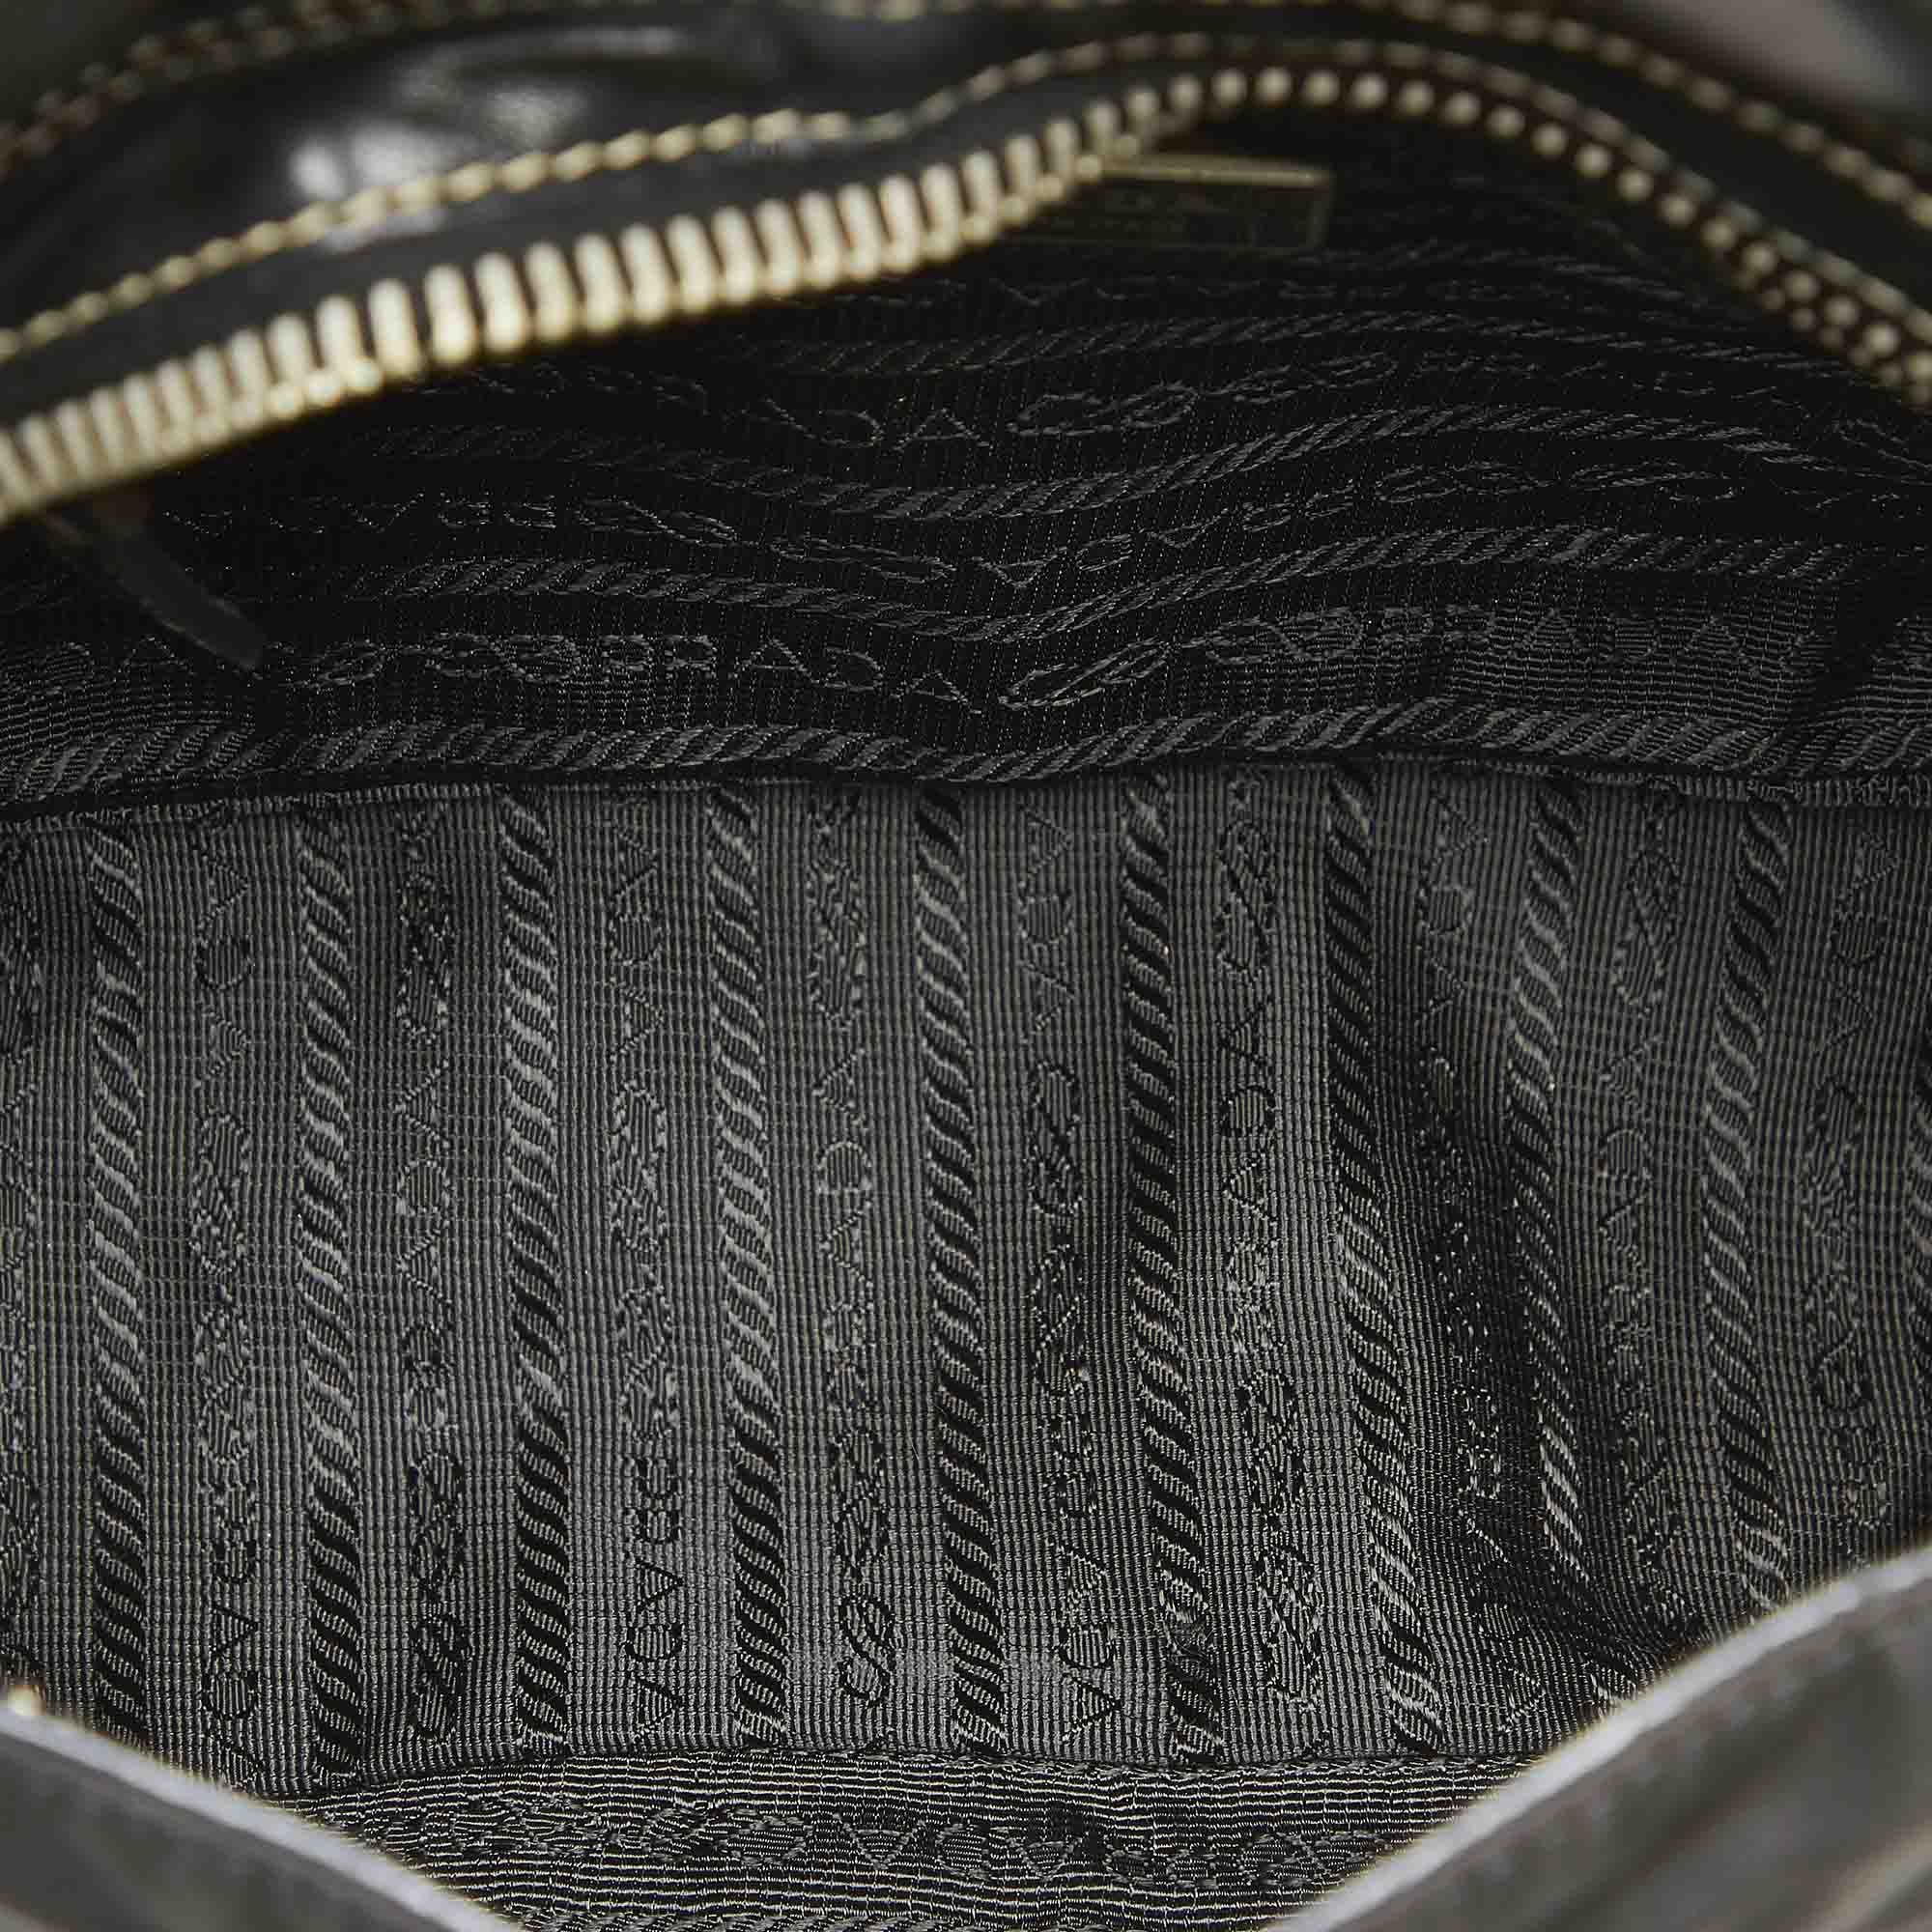 VINTAGE. RRP AS NEW. This shoulder bag features a nylon body with leather trim, tassel detail, a flat leather strap, a front flap with magnetic closure, and an interior zip pocket.Exterior back is discolored. Exterior bottom is discolored. Exterior corners is discolored. Exterior front is discolored. Exterior handle is discolored. Exterior side is discolored. Buckle is scratched and tarnished. Lock is scratched and tarnished. Studs is scratched and tarnished. Zipper is scratched and tarnished. Interior lining is discolored. Interior pocket is discolored.

Dimensions:
Length 17cm
Width 30cm
Depth 9cm
Shoulder Drop 25cm

Original Accessories: Charm

Color: Black
Material: Fabric x Nylon x Leather x Calf
Country of Origin: Italy
Boutique Reference: SSU94297K1342


Product Rating: GoodCondition